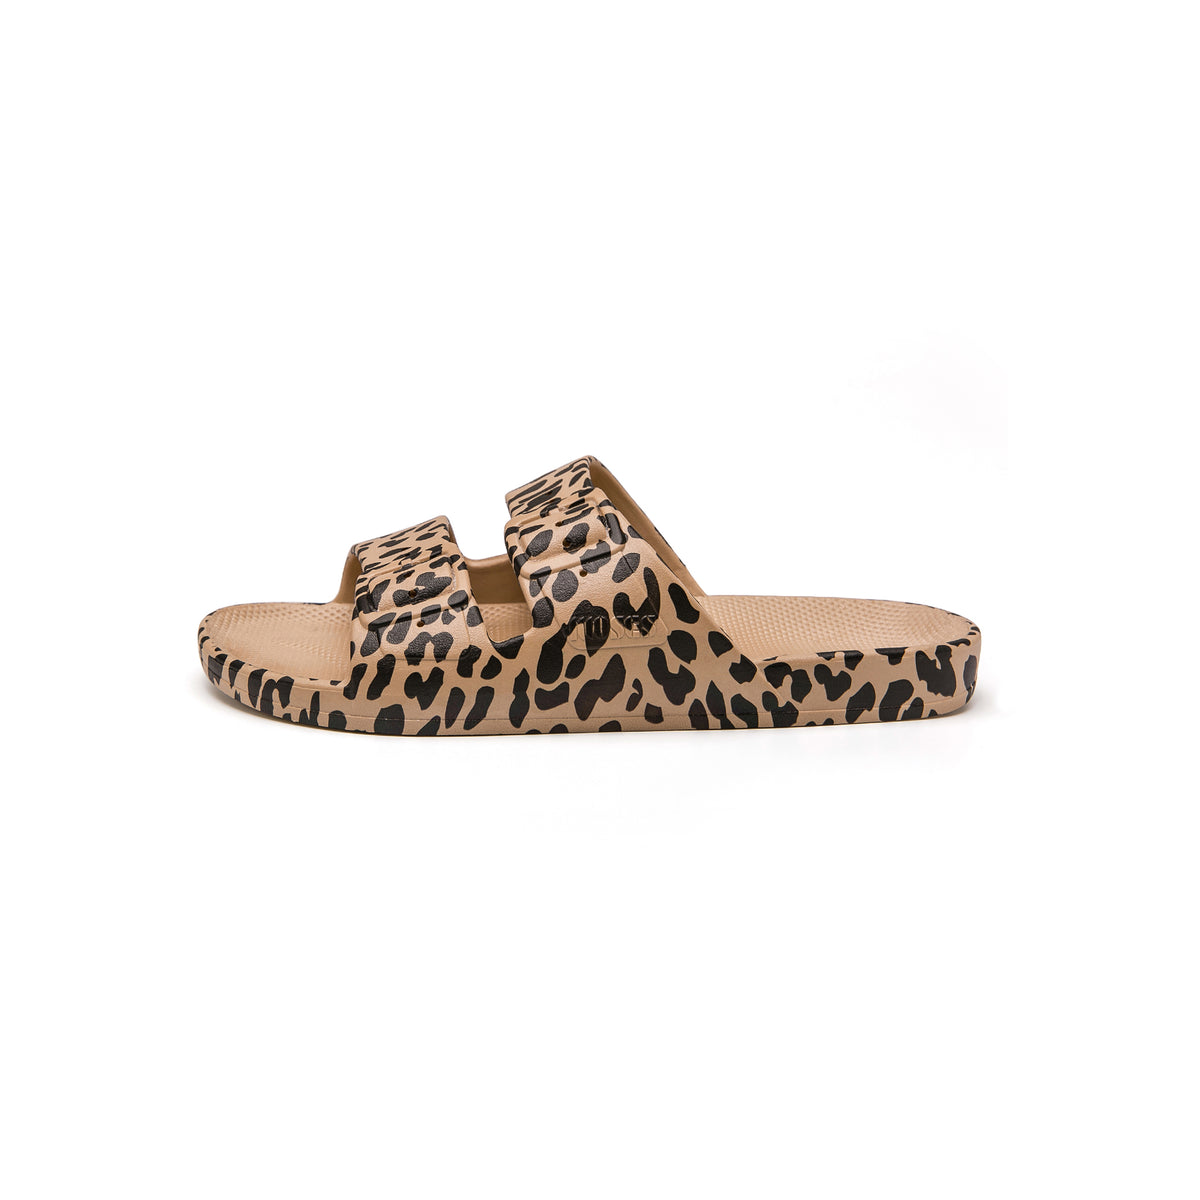 Parallel Culture Shoes and Fashion Online SLIDES FREEDOM MOSES FREEDOM MOSES PRINTS LEOPARD